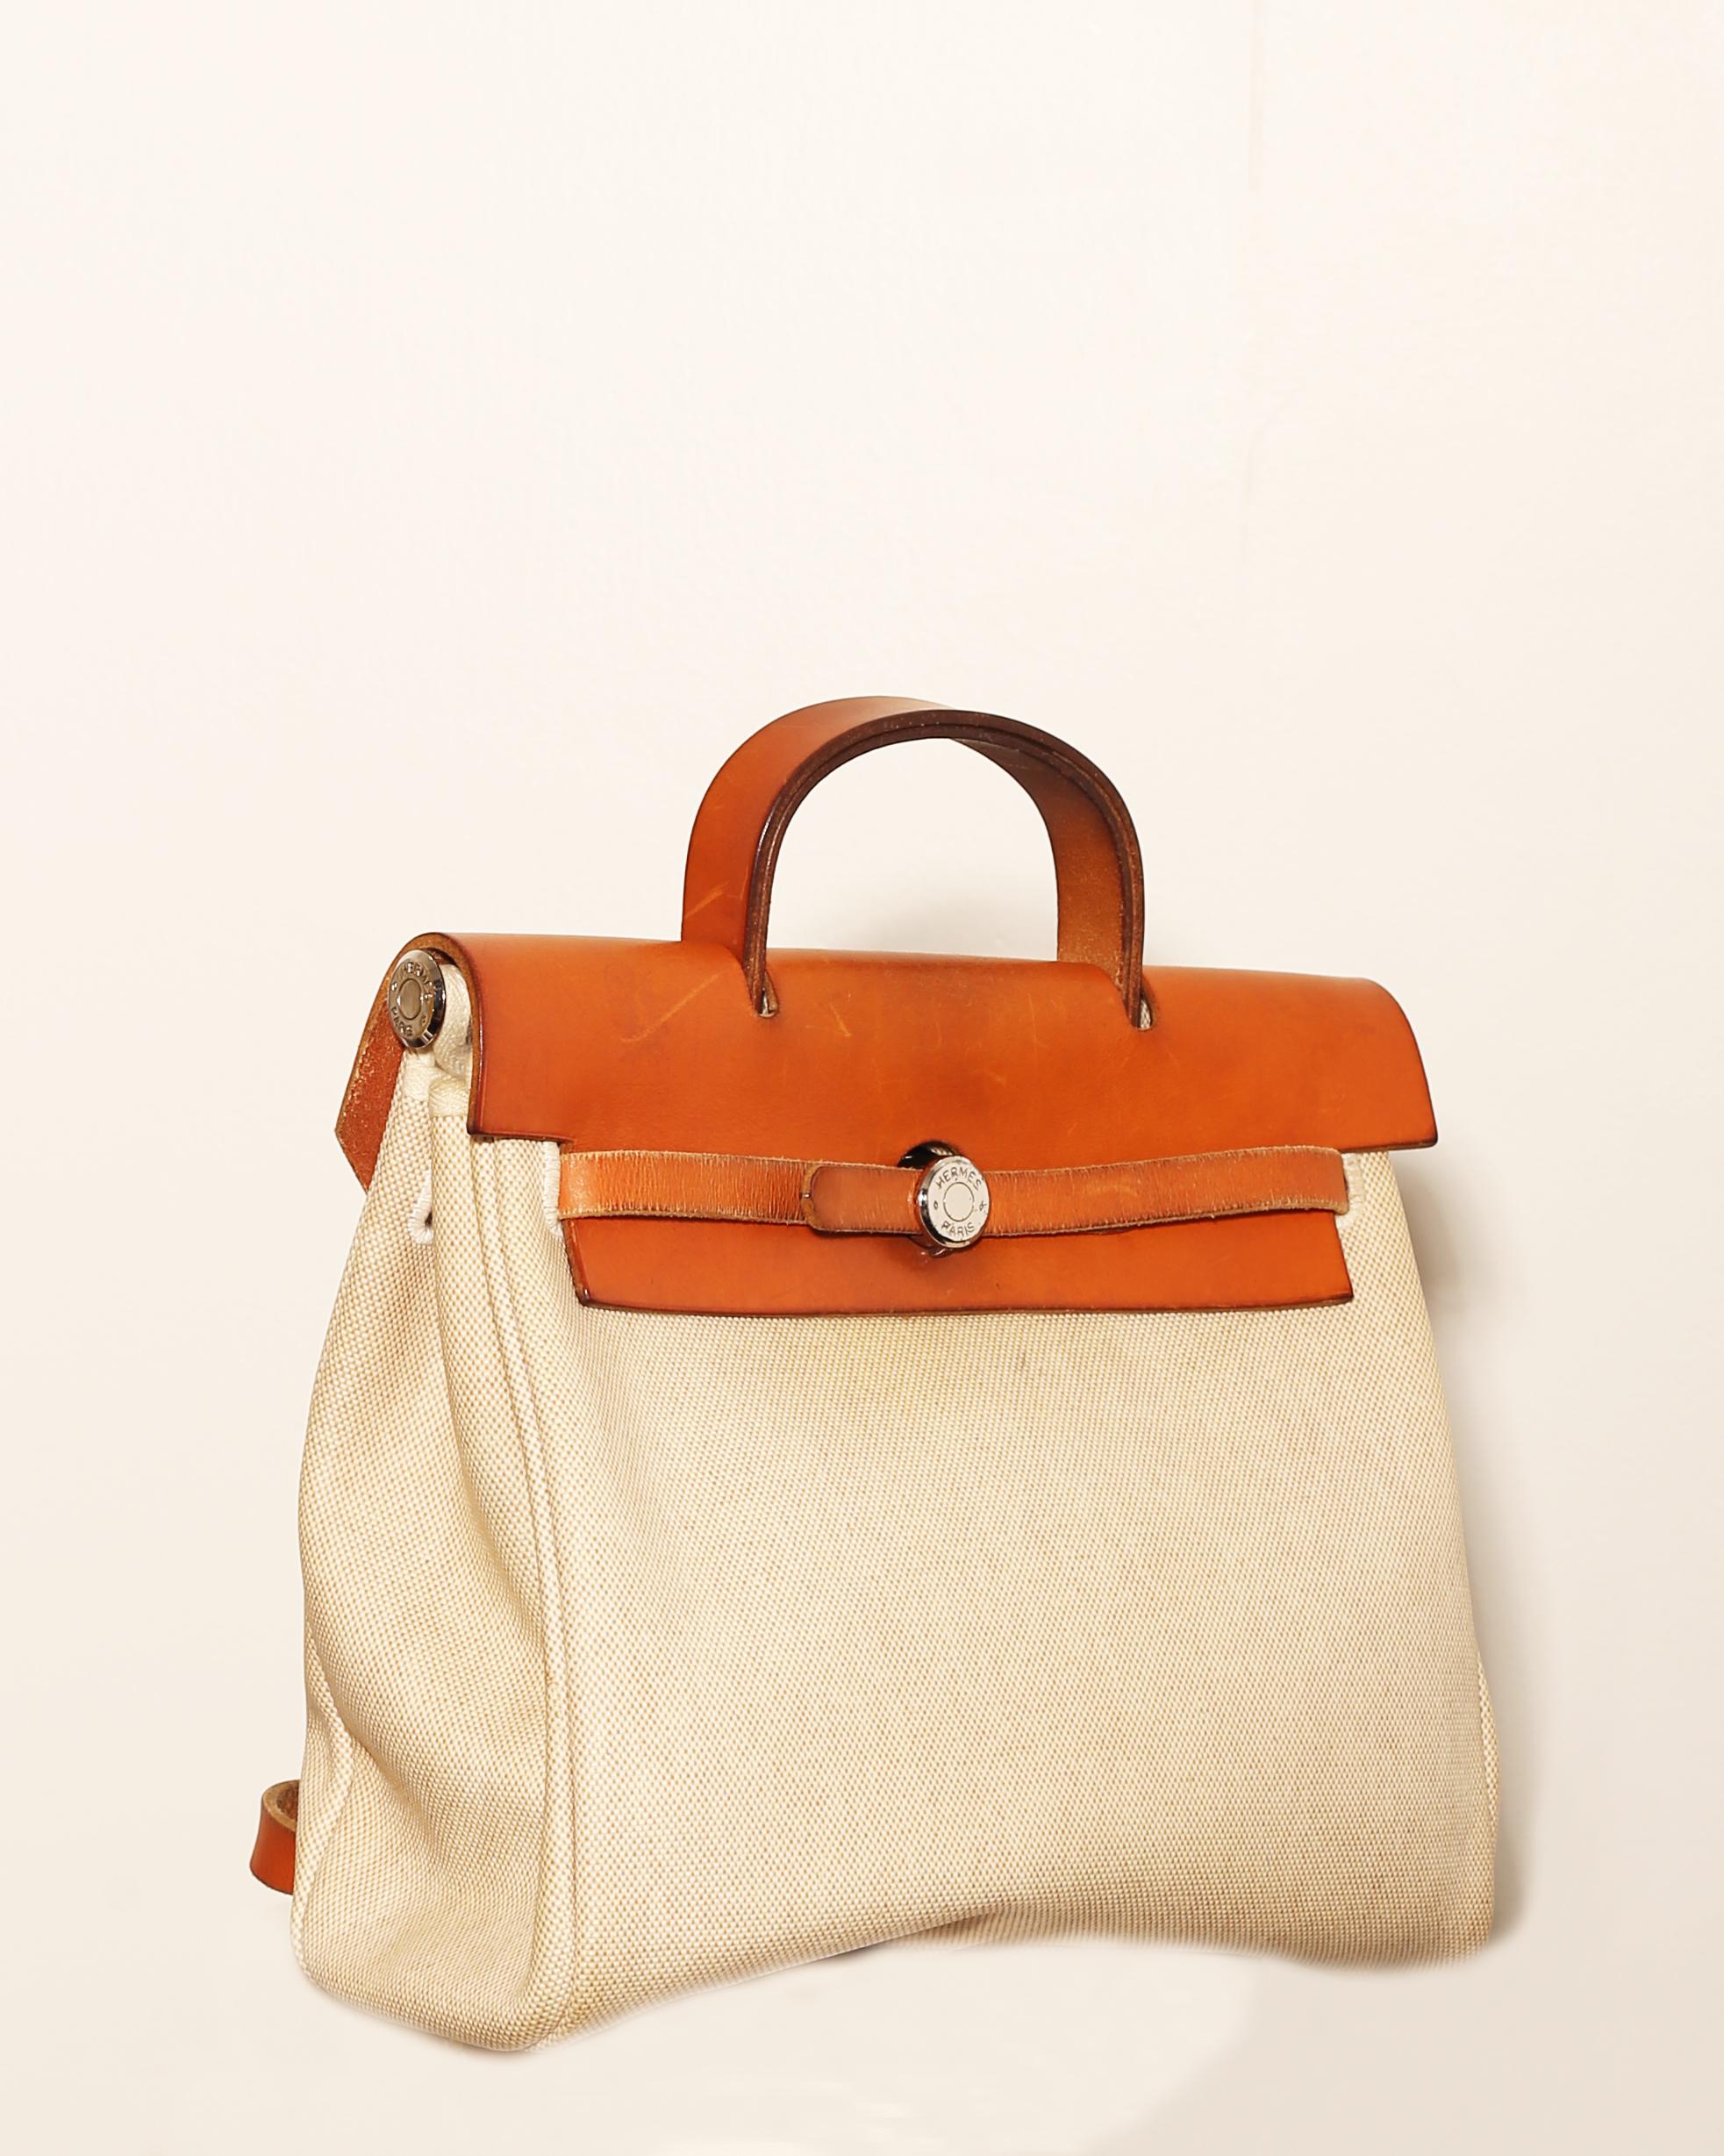 This authentic Hermes Herbag Zip Leather and Toile 39 showcases the brand's more subtle and care-free design perfect for everyday. Crafted in off-white toile and natural vache hunter leather details, this stylish and functional bag features an